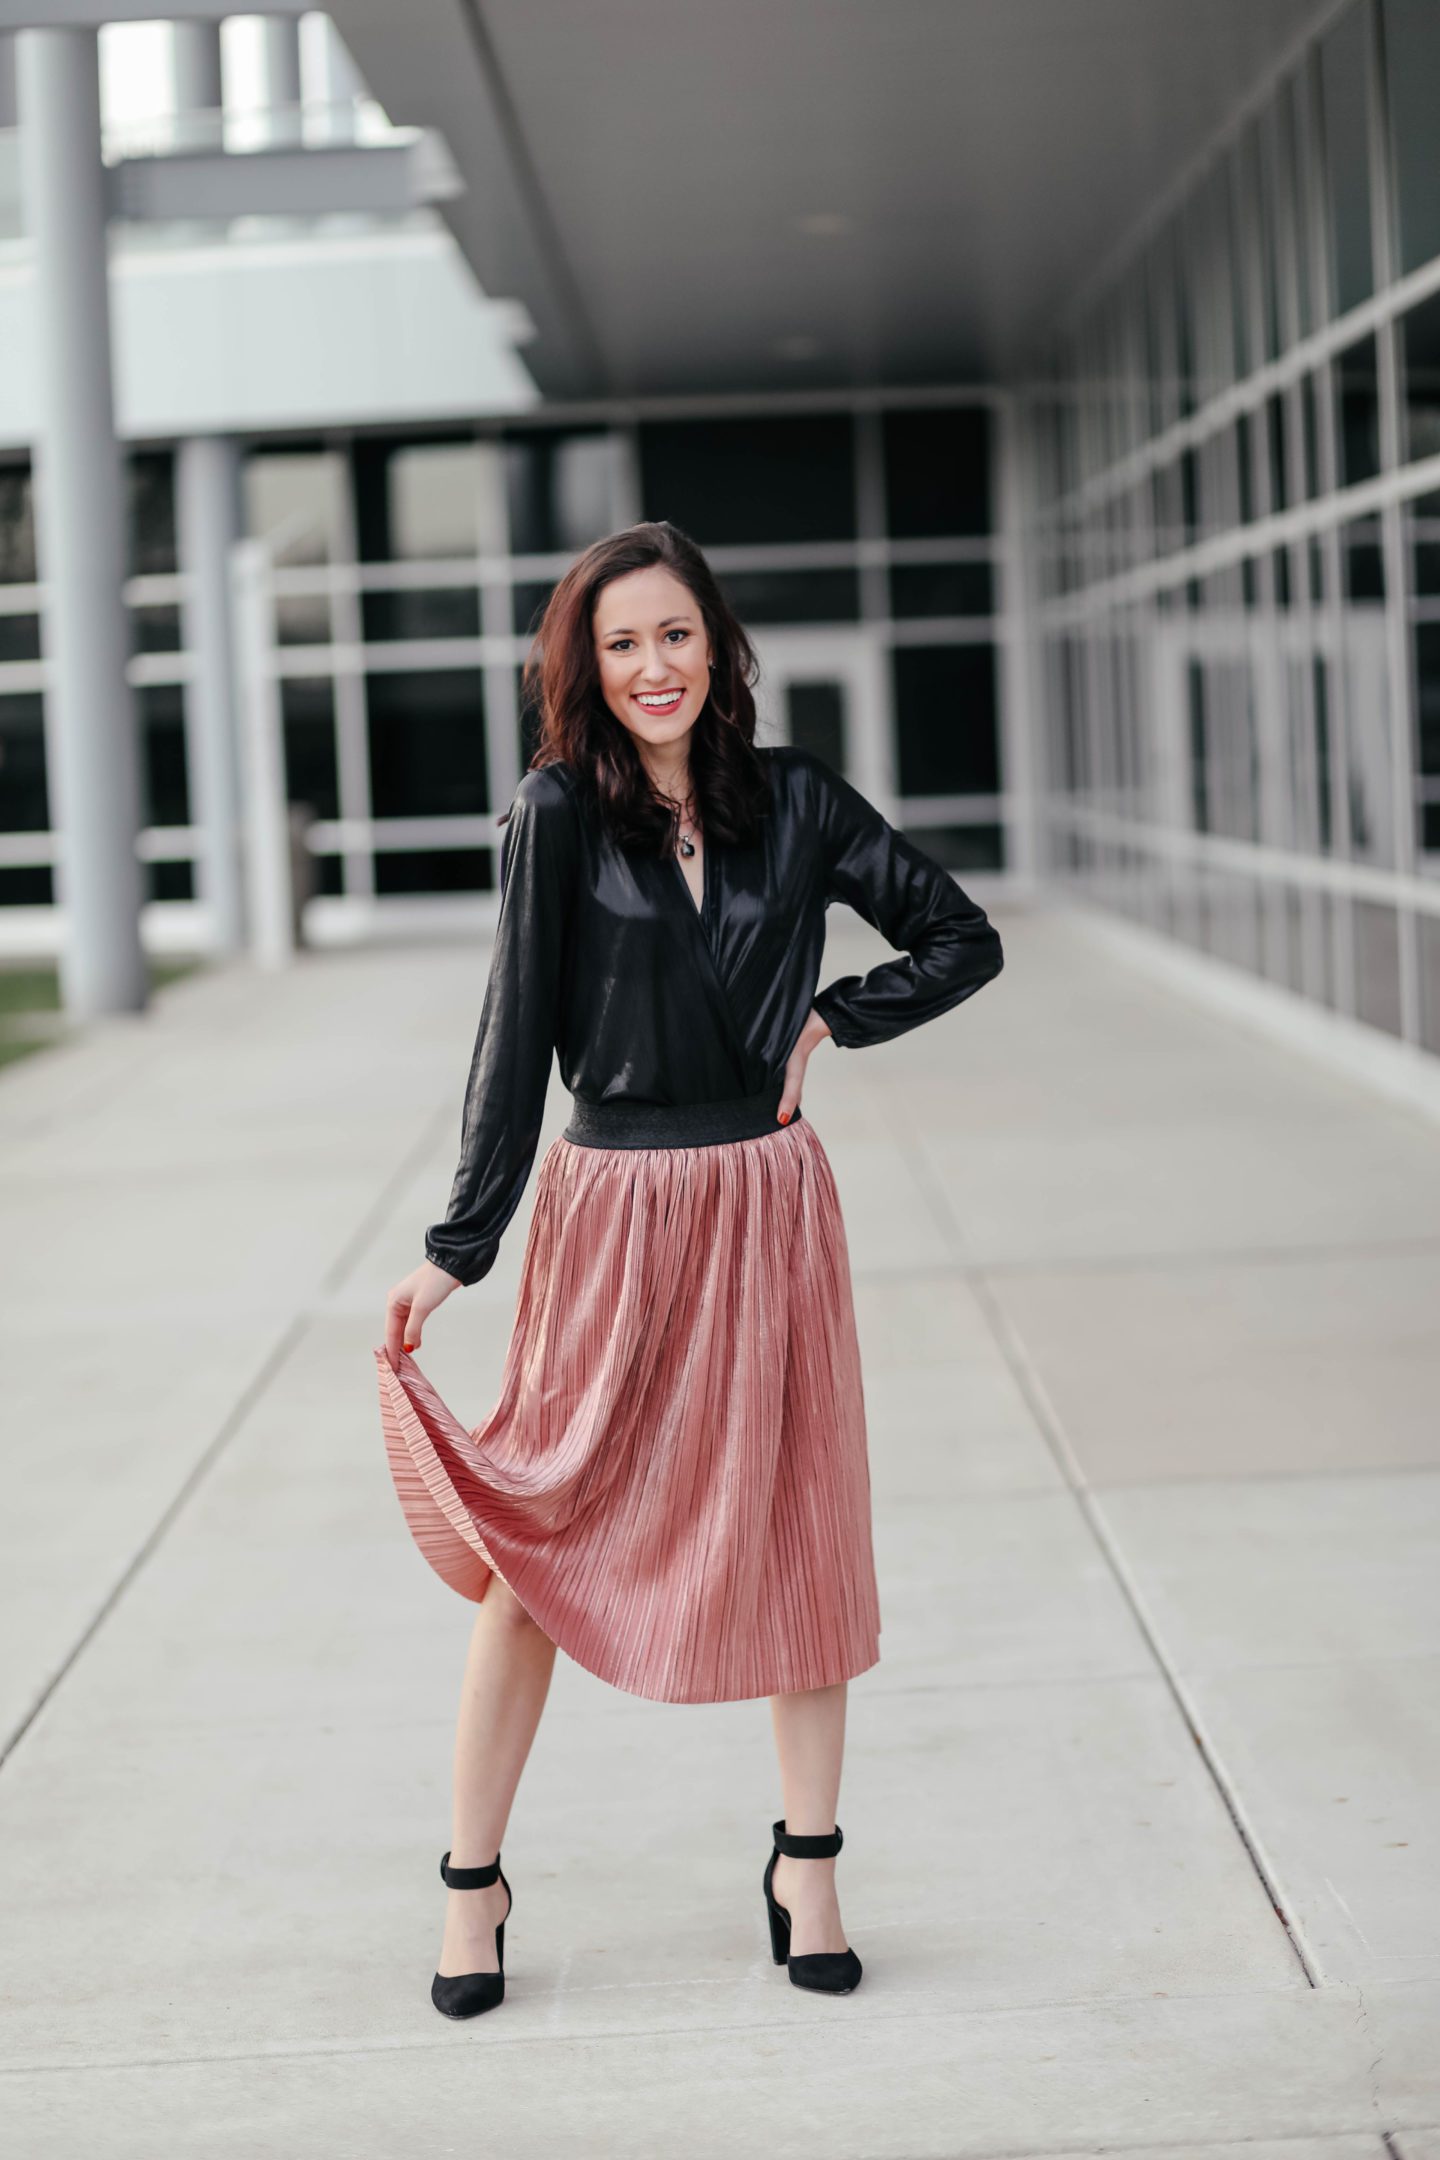 This AFFORDABLE Holiday Outfit is UNDER $80 TOTAL - you won't believe where it's all from! Pleated skirt, metallic bodysuit, and classic black pumps, all from Walmart - on Coming Up Roses